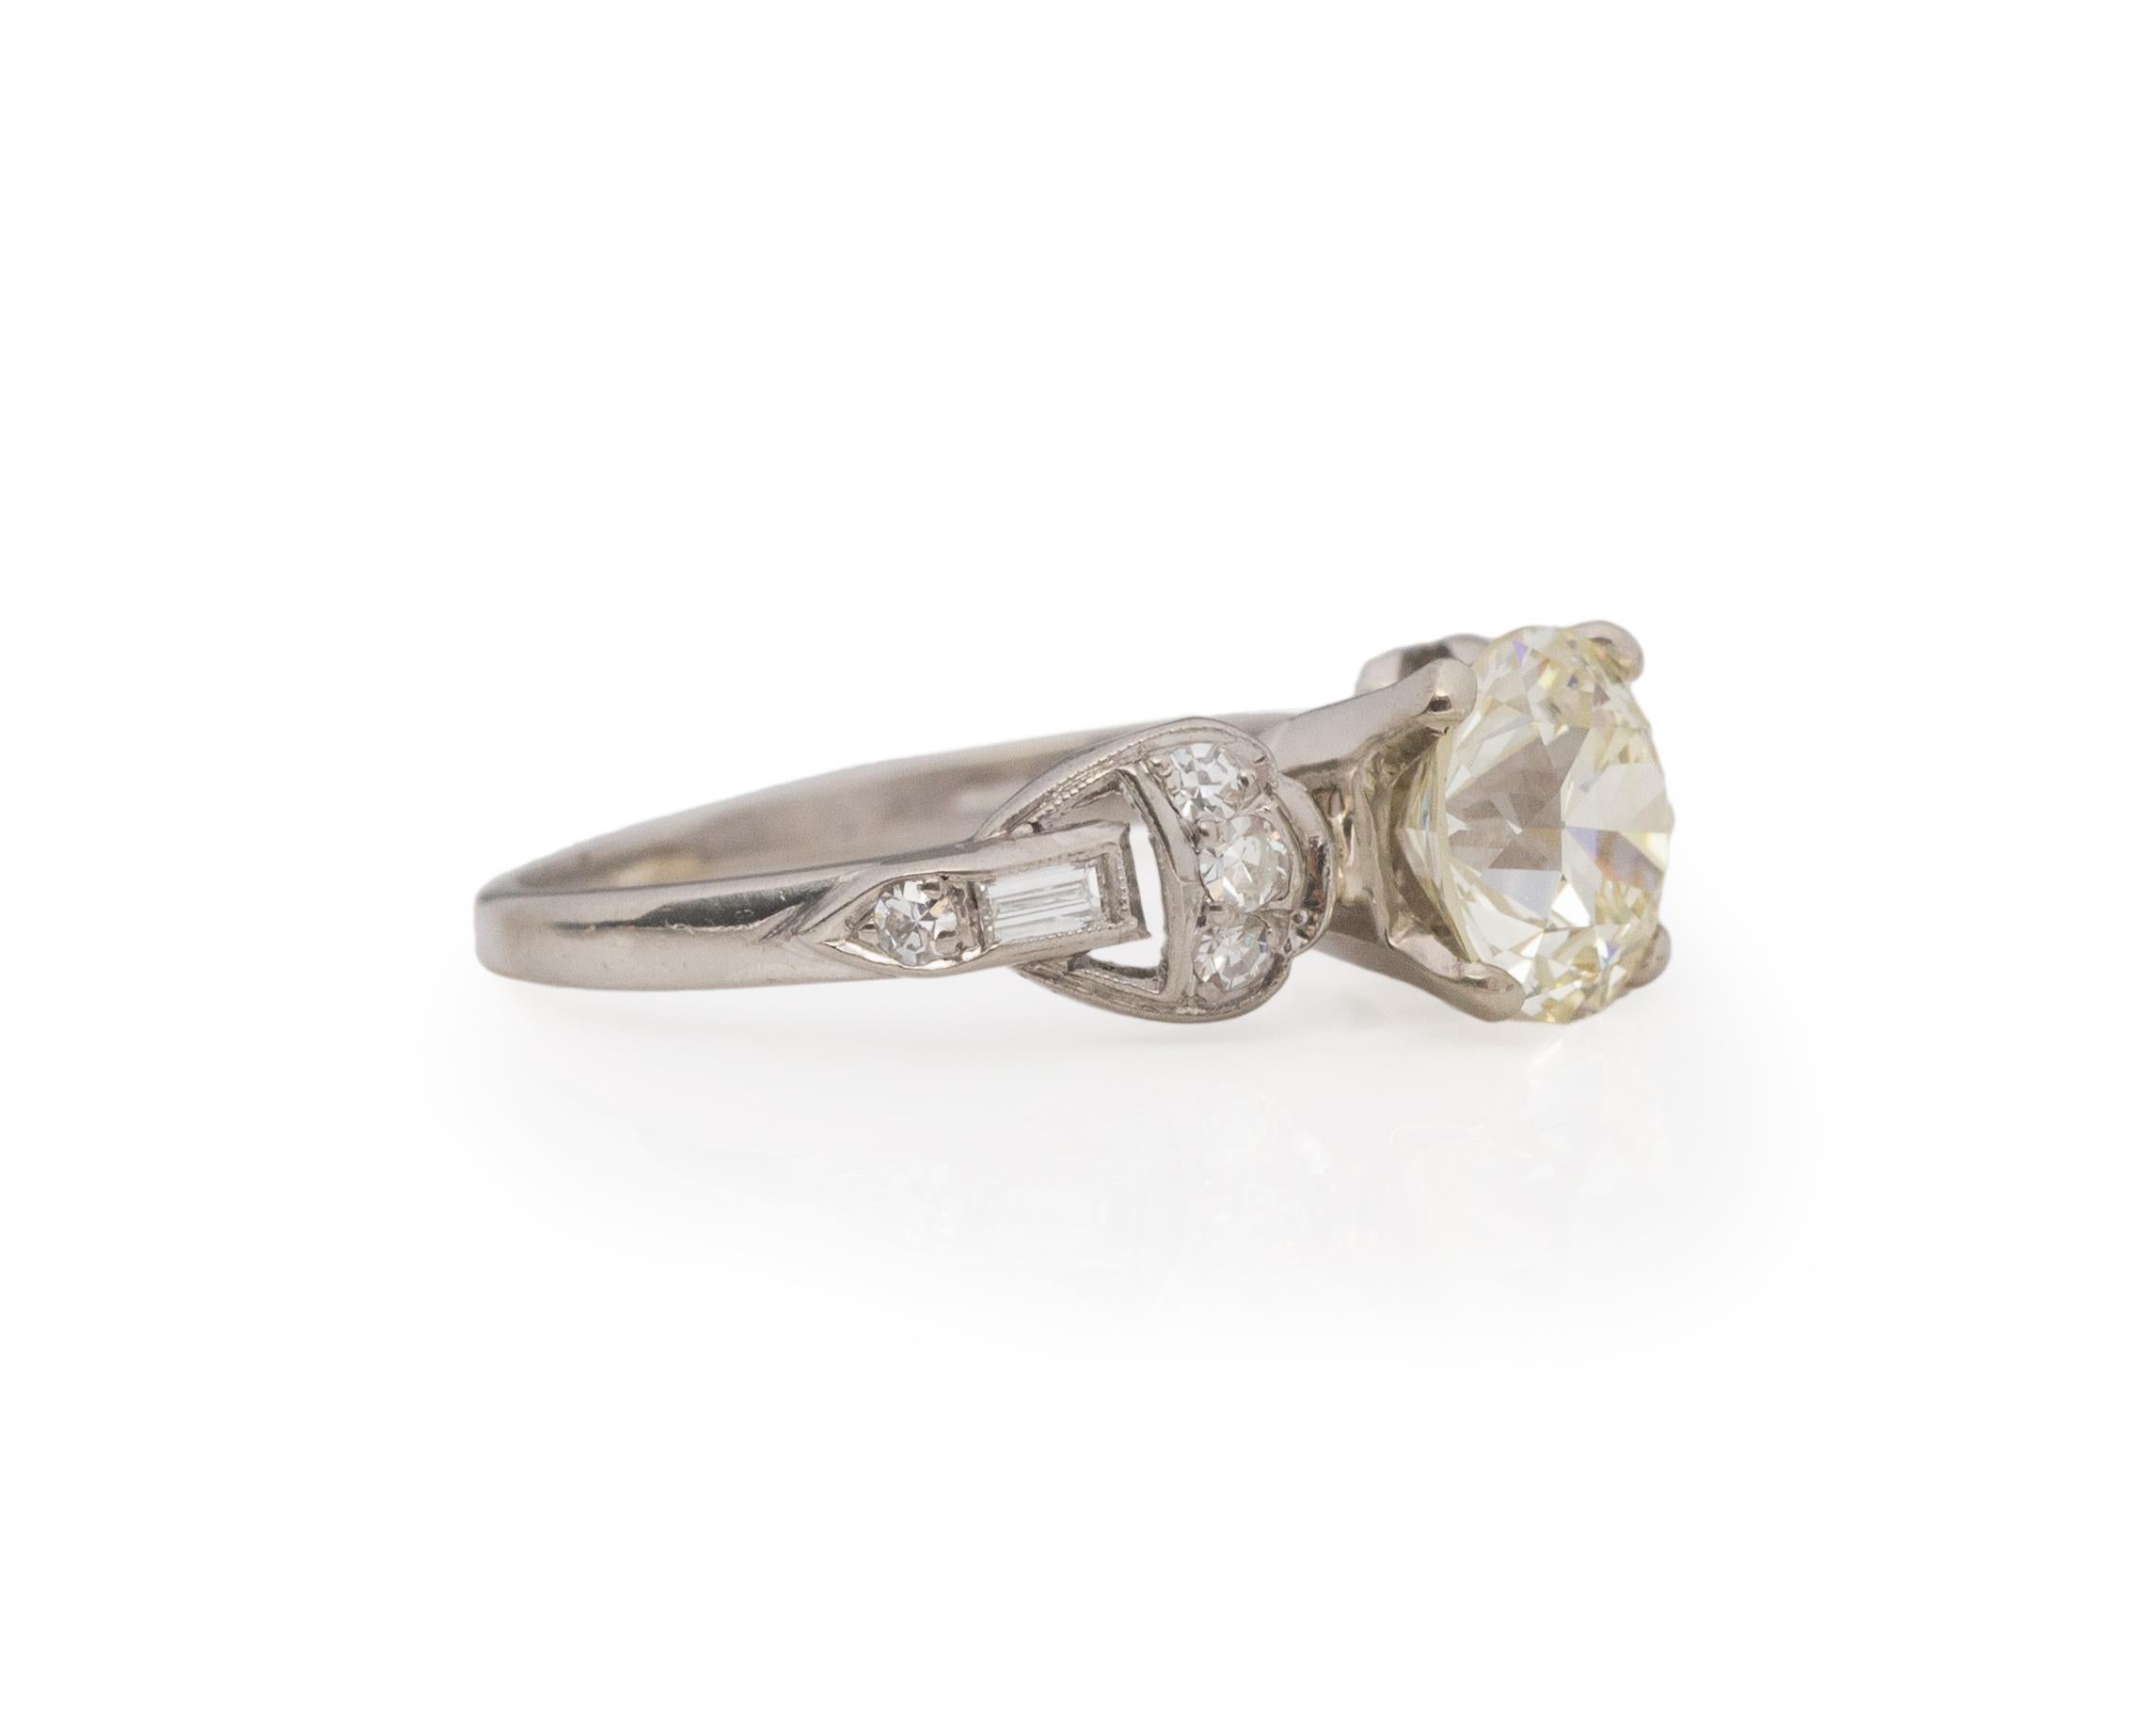 Ring Size: 5
Metal Type: Platinum [Hallmarked, and Tested]
Weight: 3.25 grams

Center Diamond Details:
GIA REPORT #:2225622858
Weight: 1.53ct
Cut: Old European brilliant
Color: OP
Clarity: VVS2
Measurements: 7.25mm x 7.22mm x 4.65mm

Finger to Top